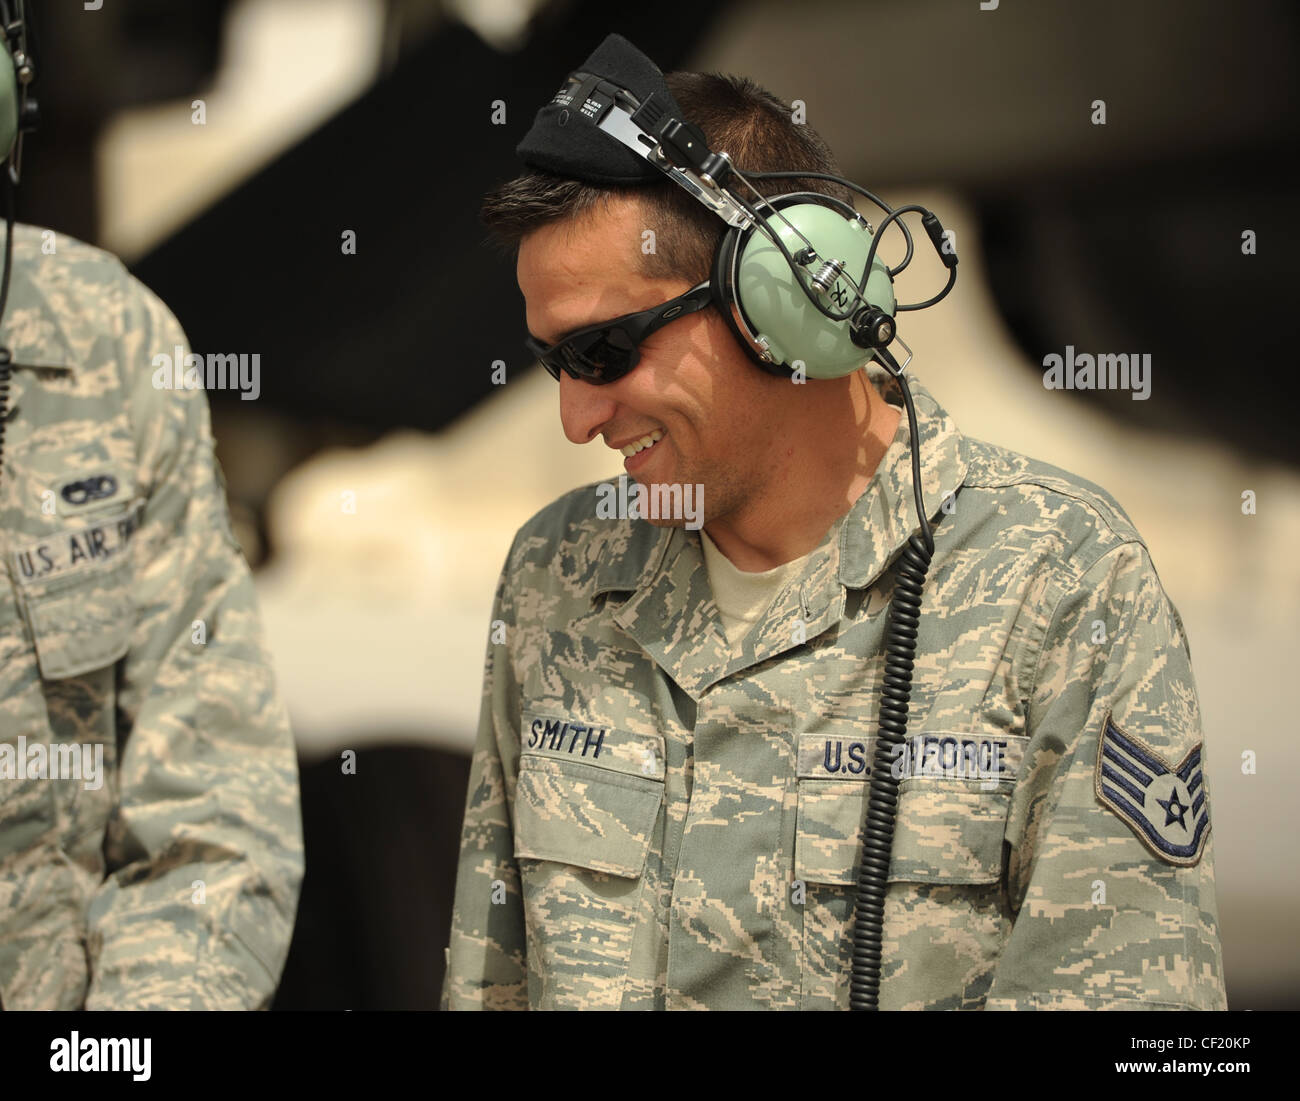 Southwest Asia Staff Sgt Marcus Smith High Resolution Stock Photography and  Images - Alamy